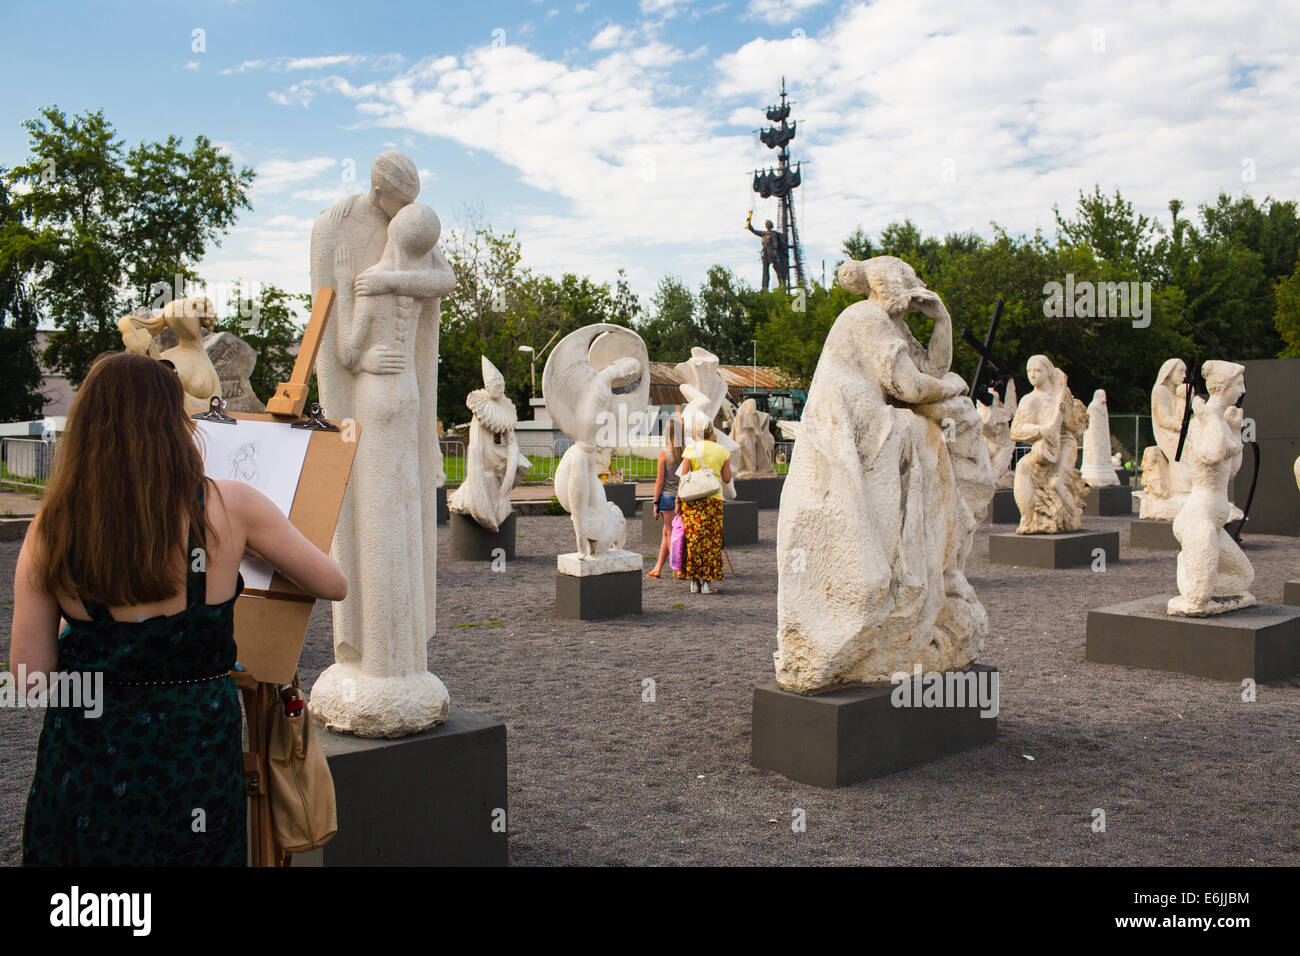 Statues in sculpture park of Gorky Park, Moscow, Russia Stock Photo